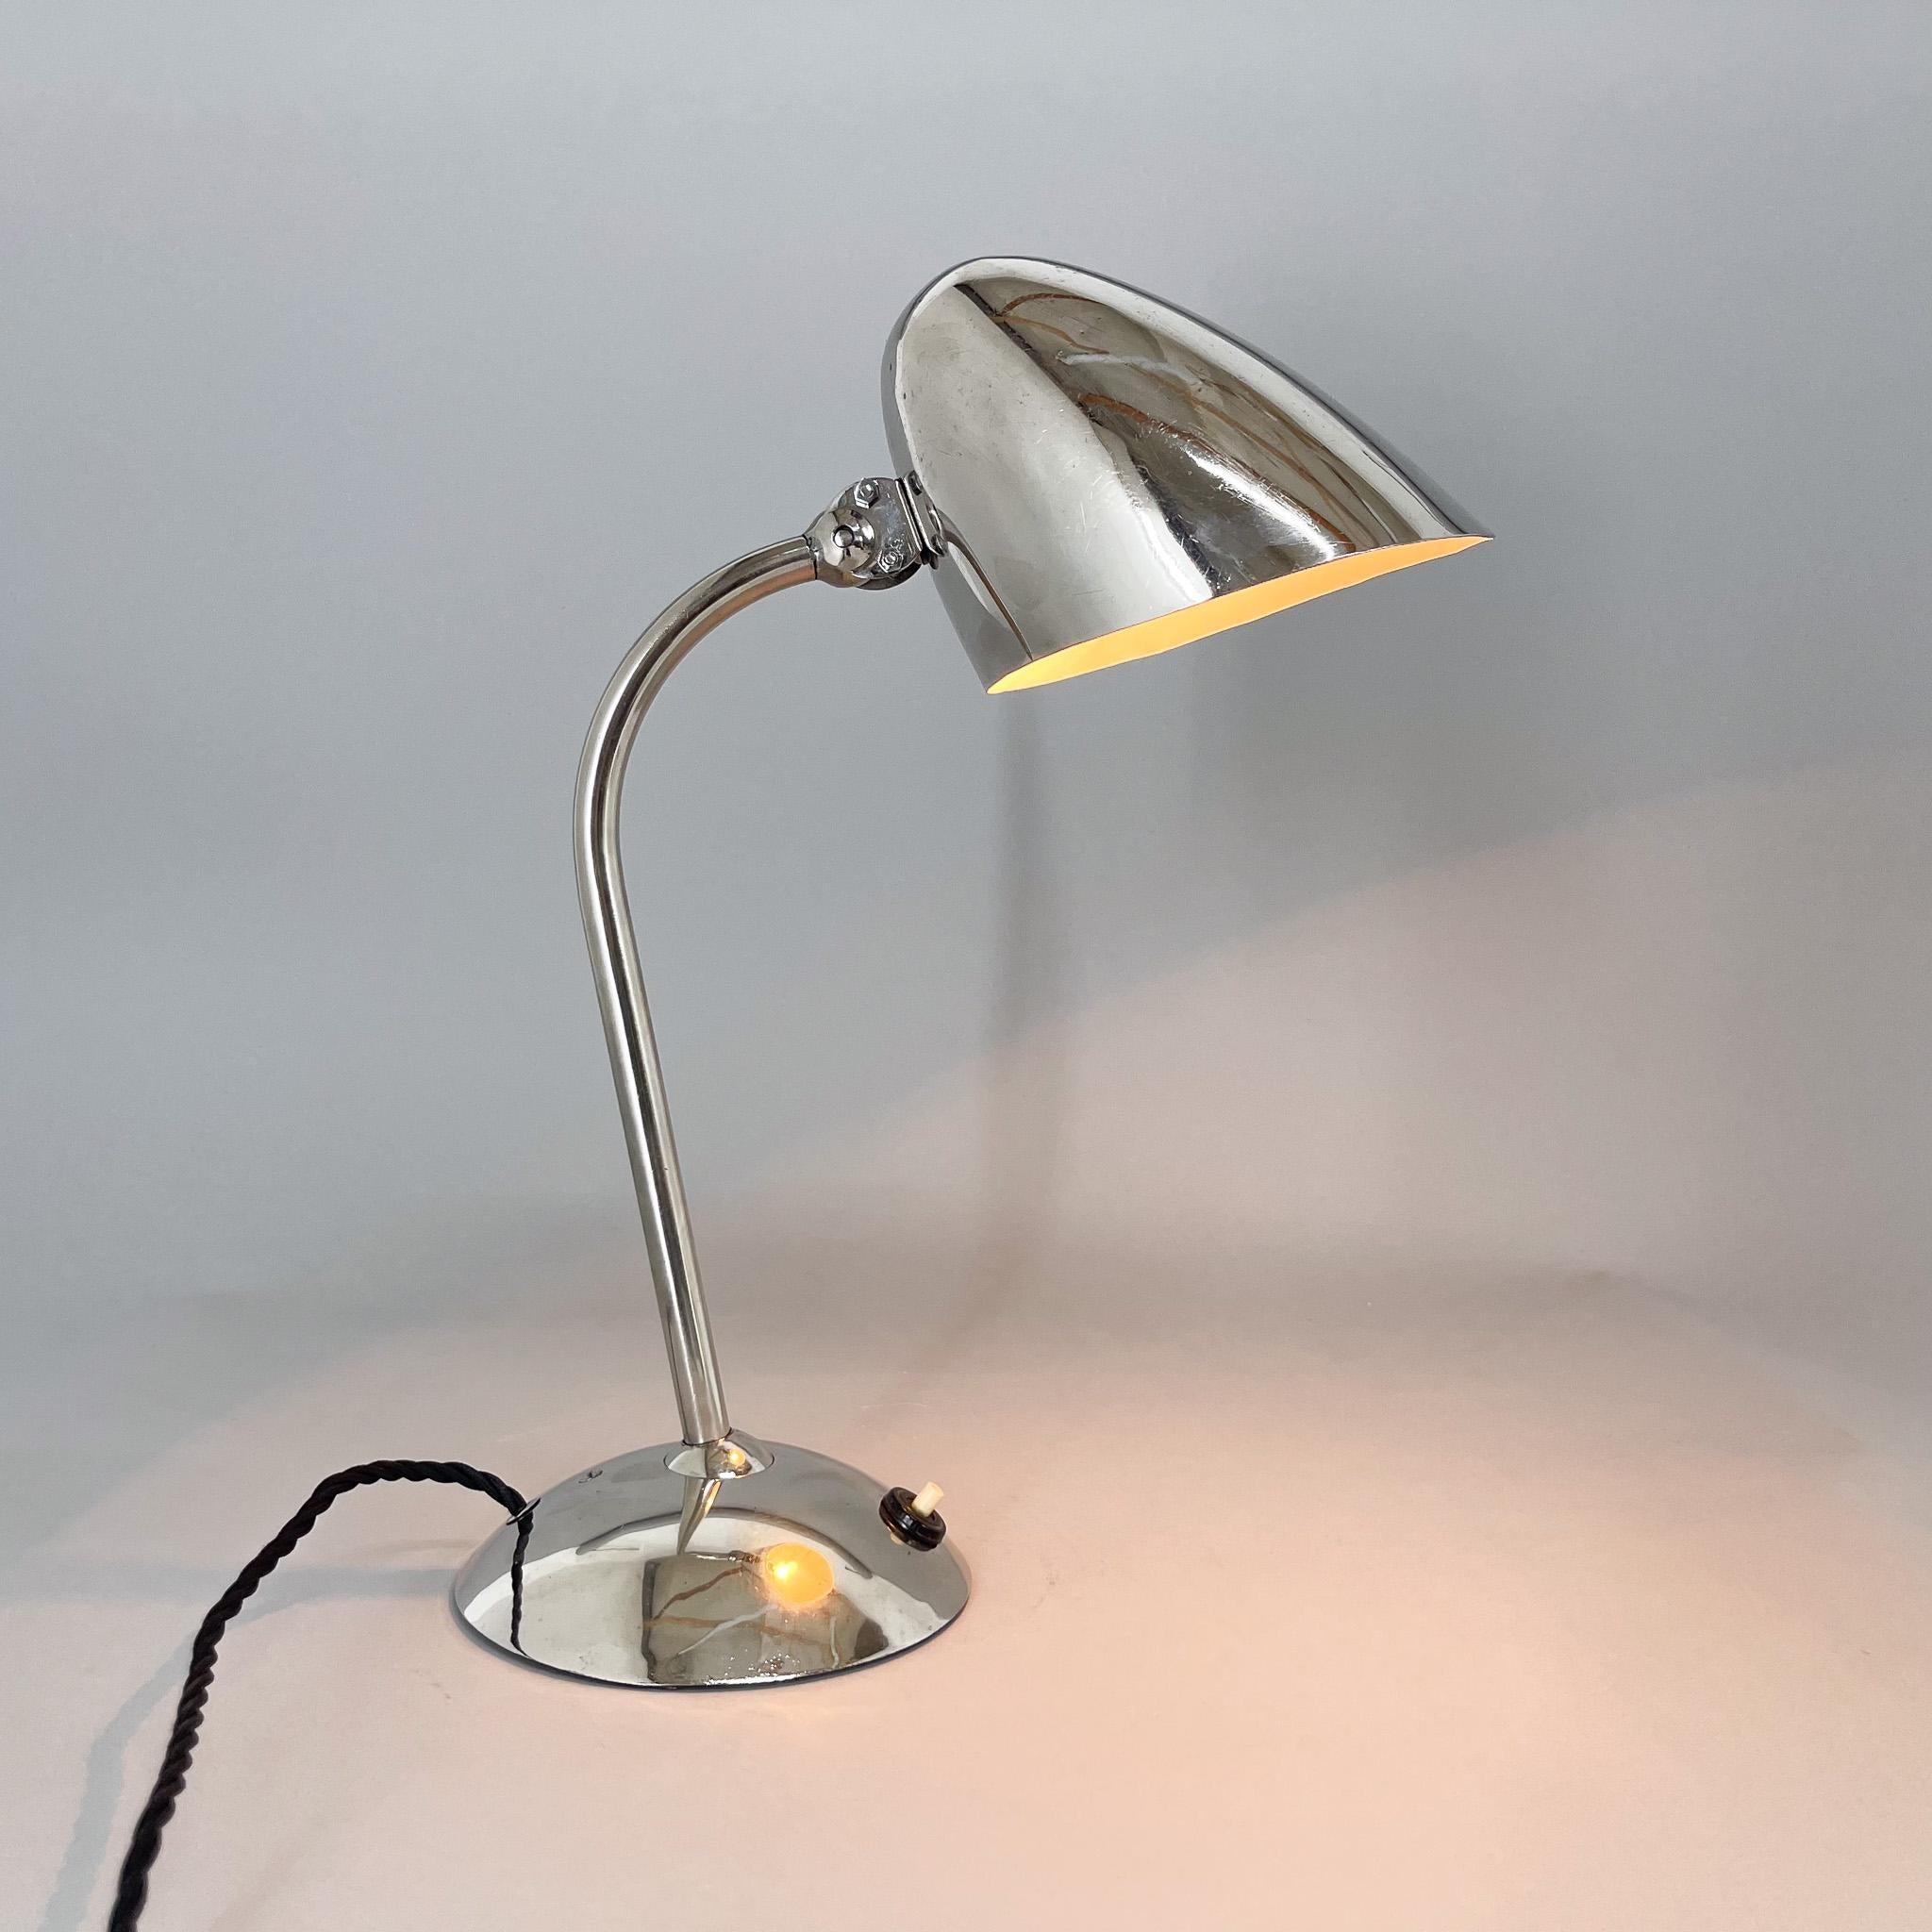 Functionalist / Bauhaus Flexible Table Lamp by Franta Anyz, 1930s For Sale 5